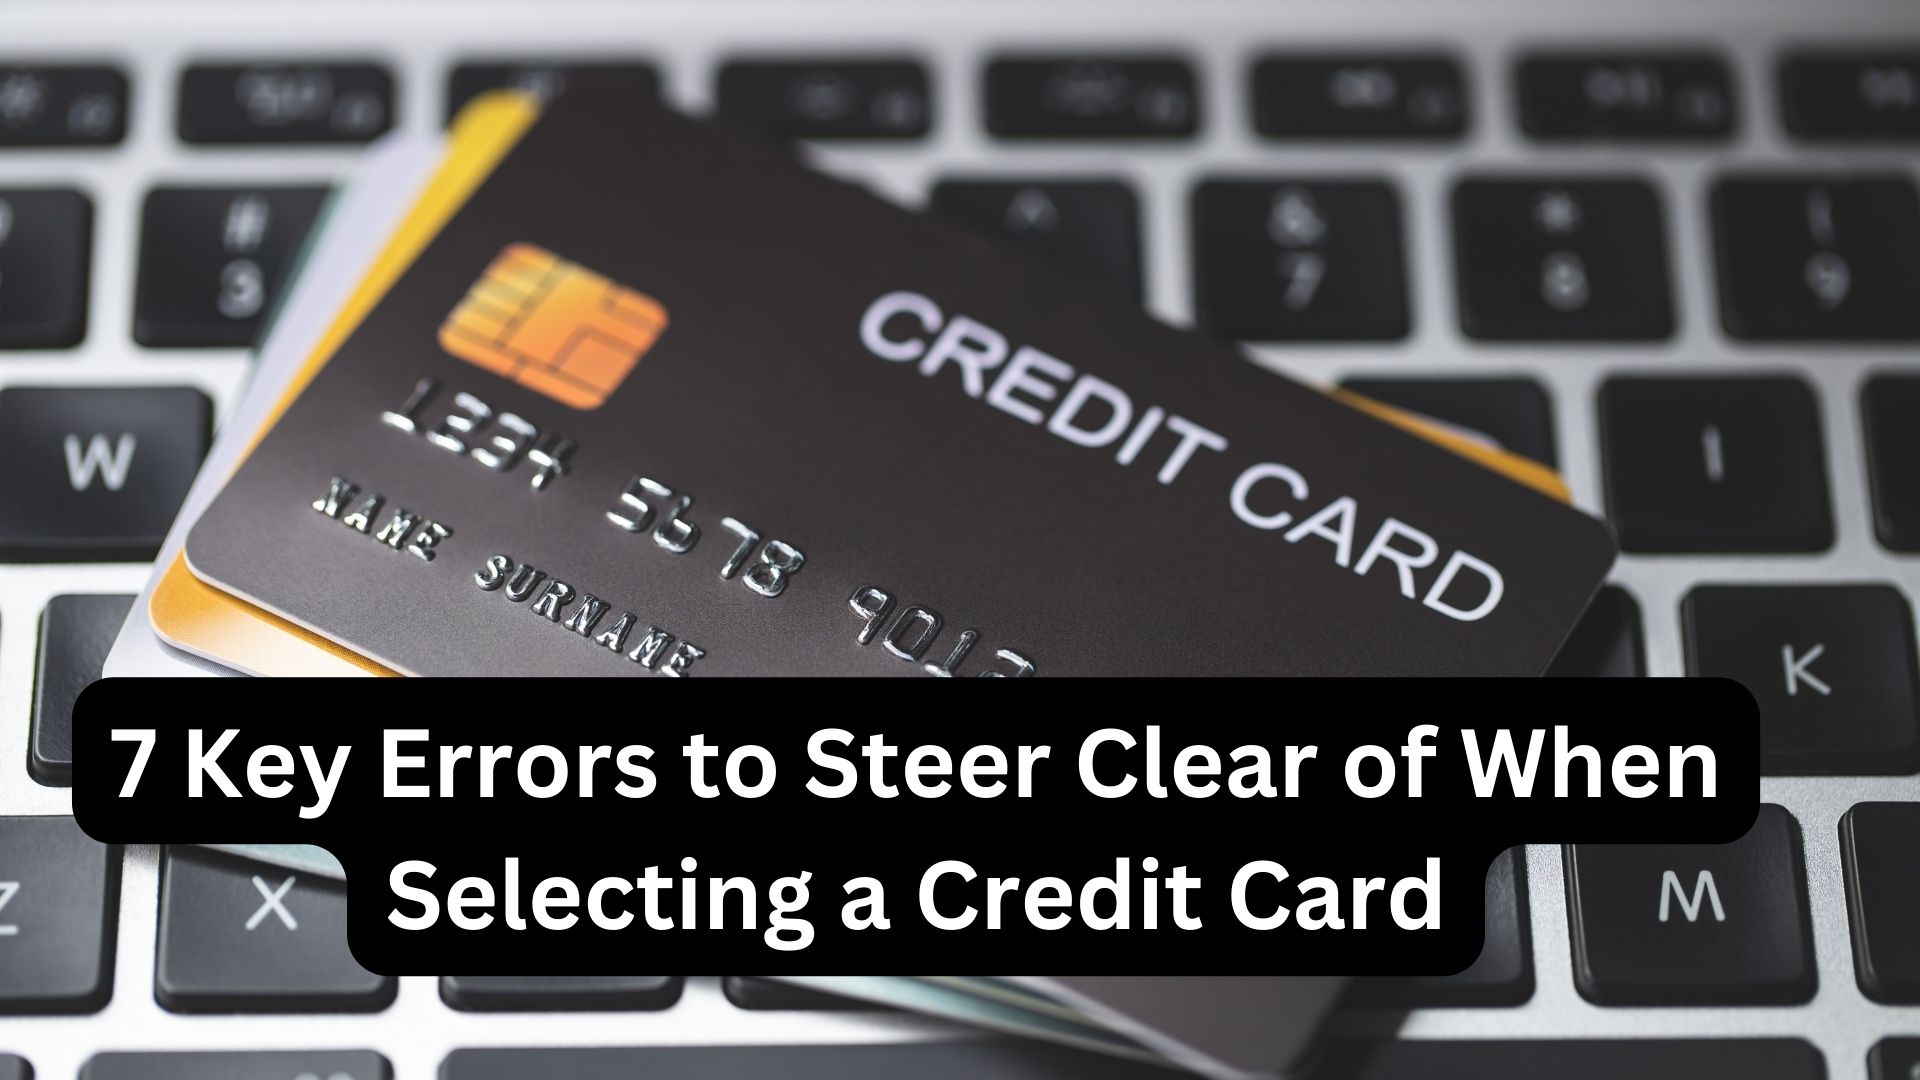 7 Key Errors to Steer Clear of When Selecting a Credit Card